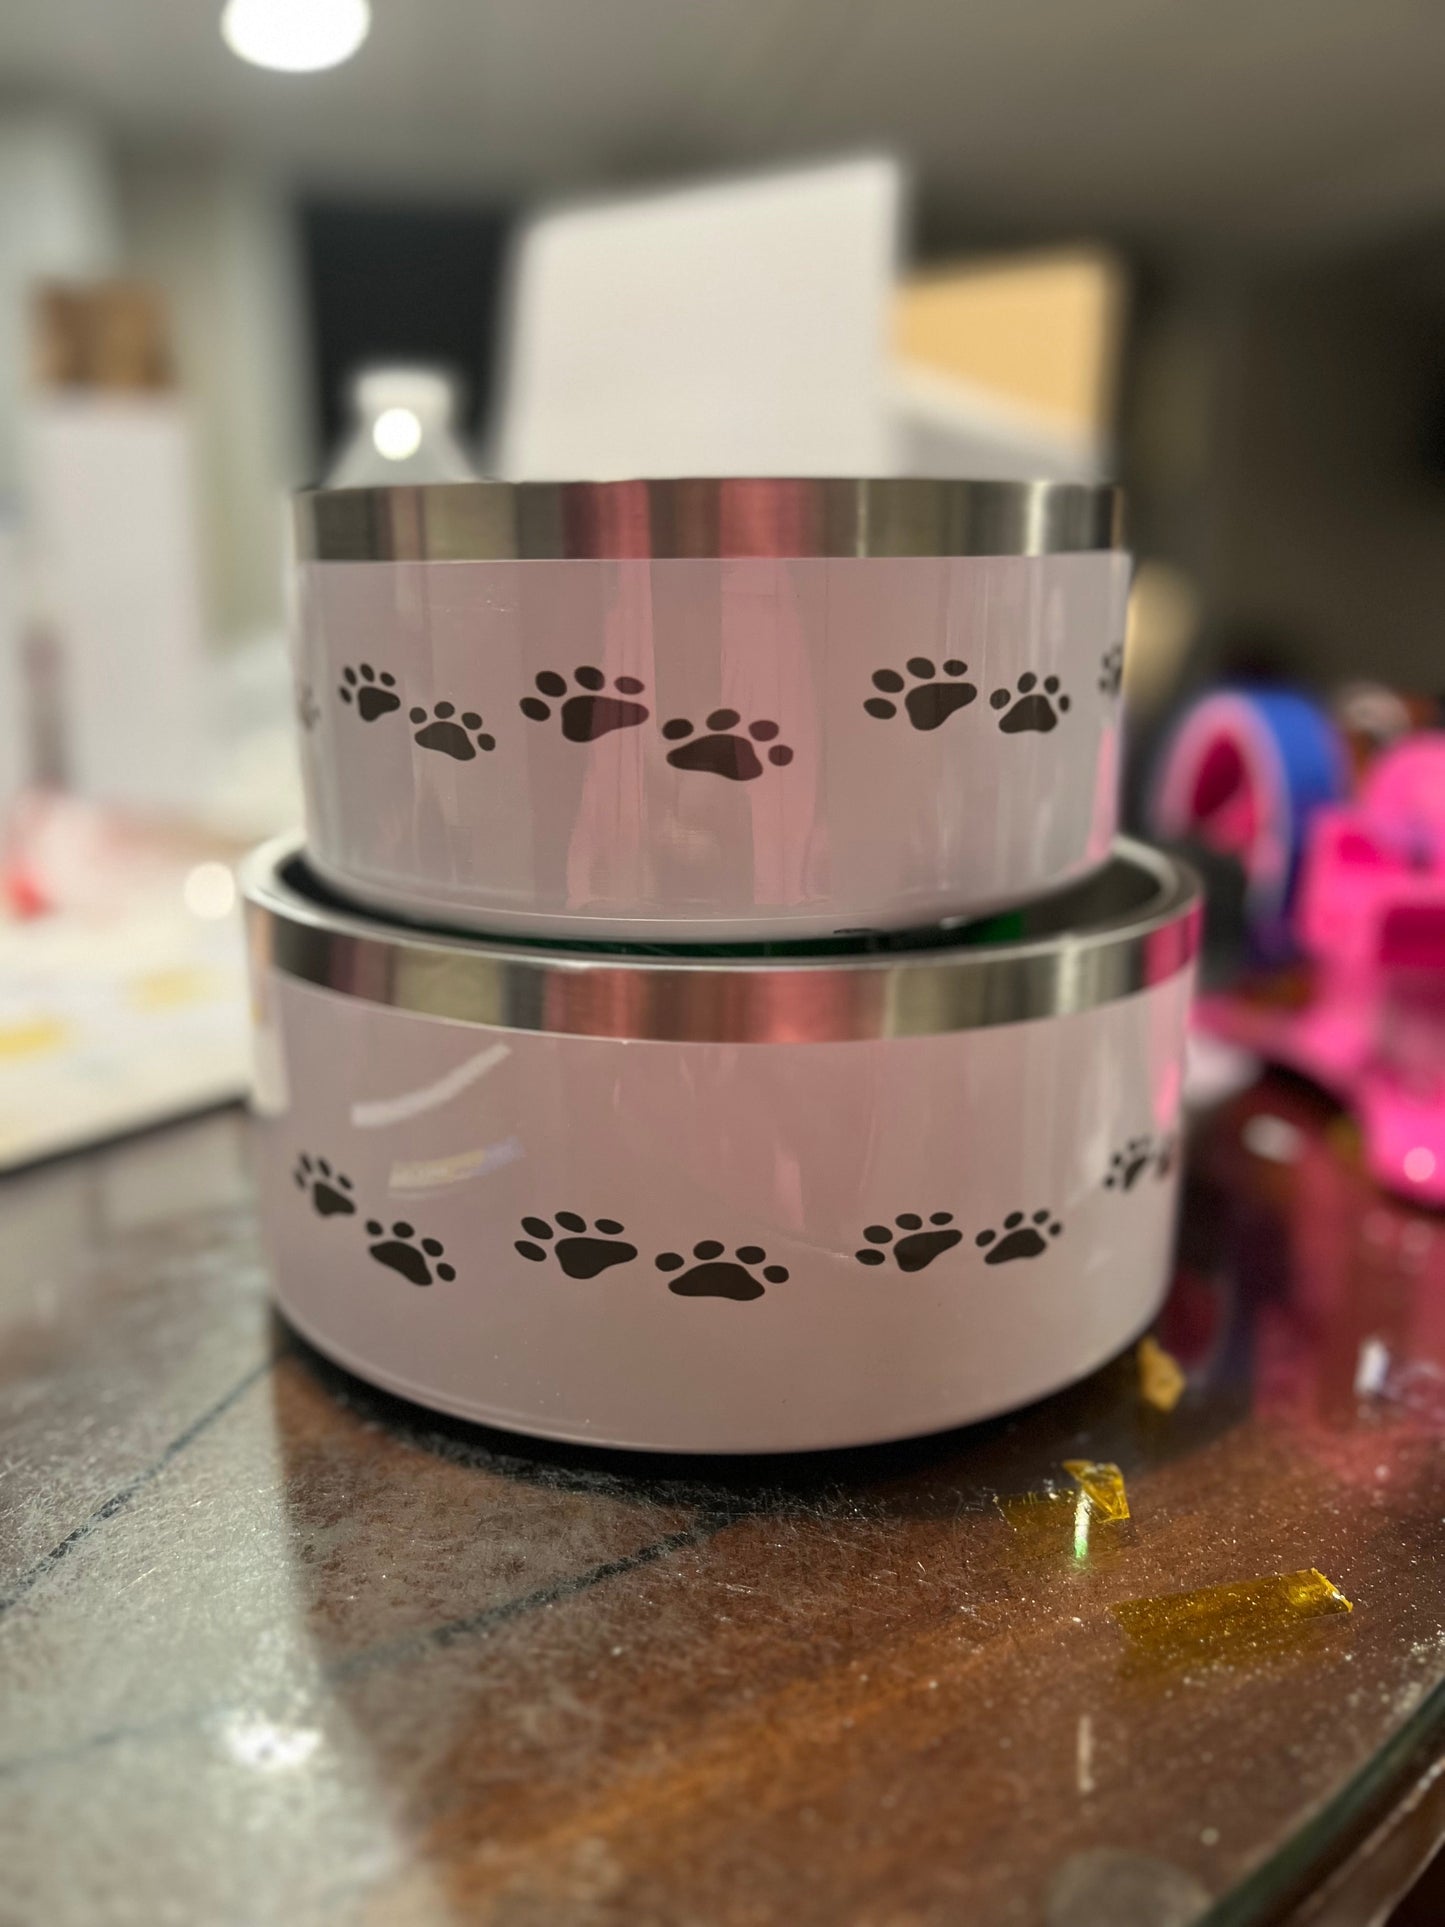 64oz stainless steel dog bowl